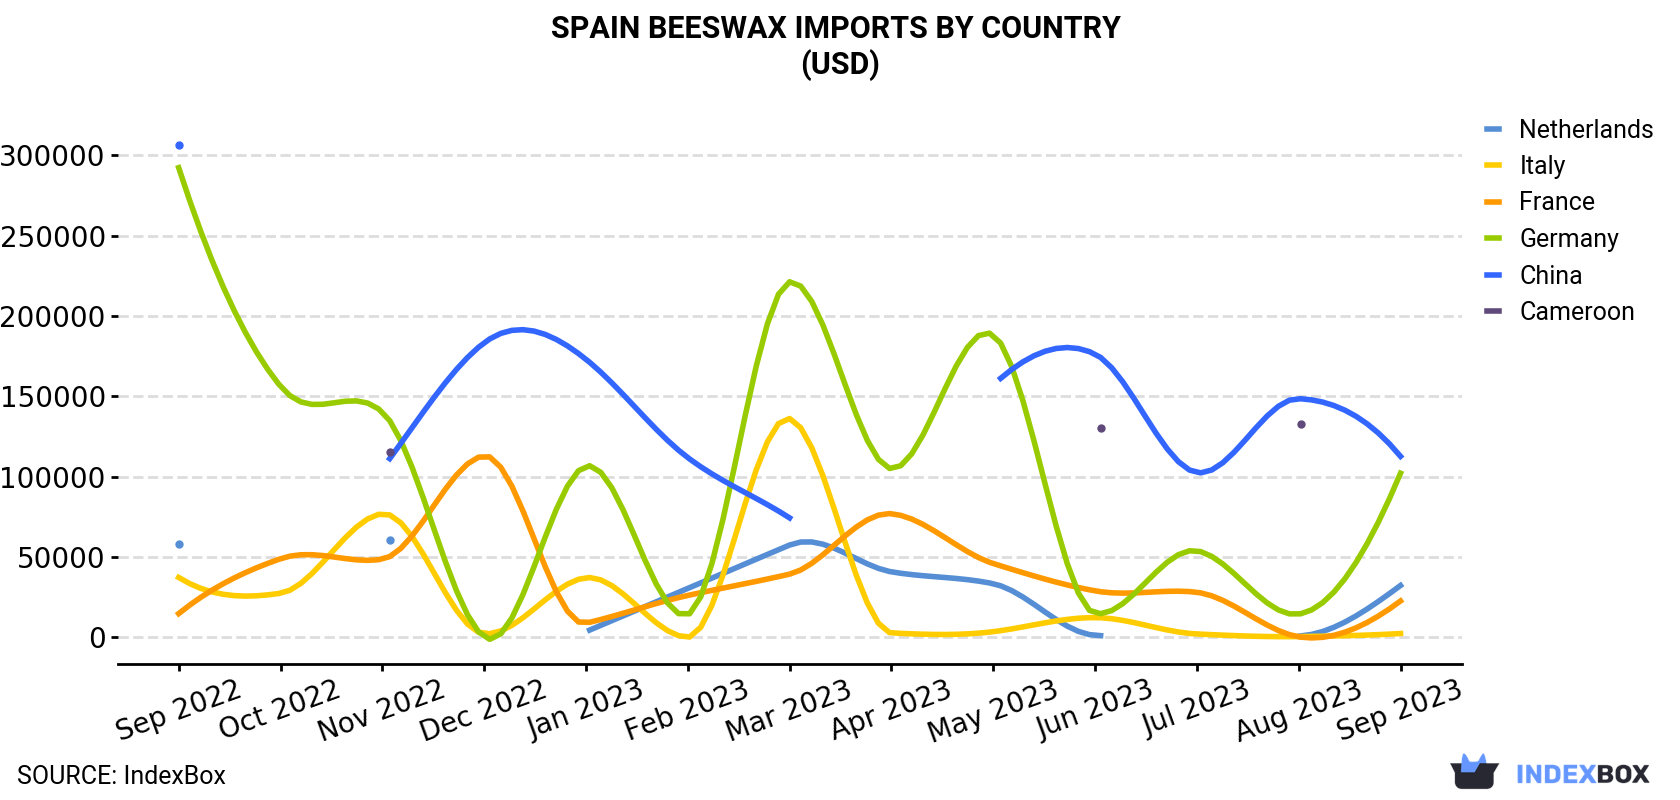 Spain Beeswax Imports By Country (USD)